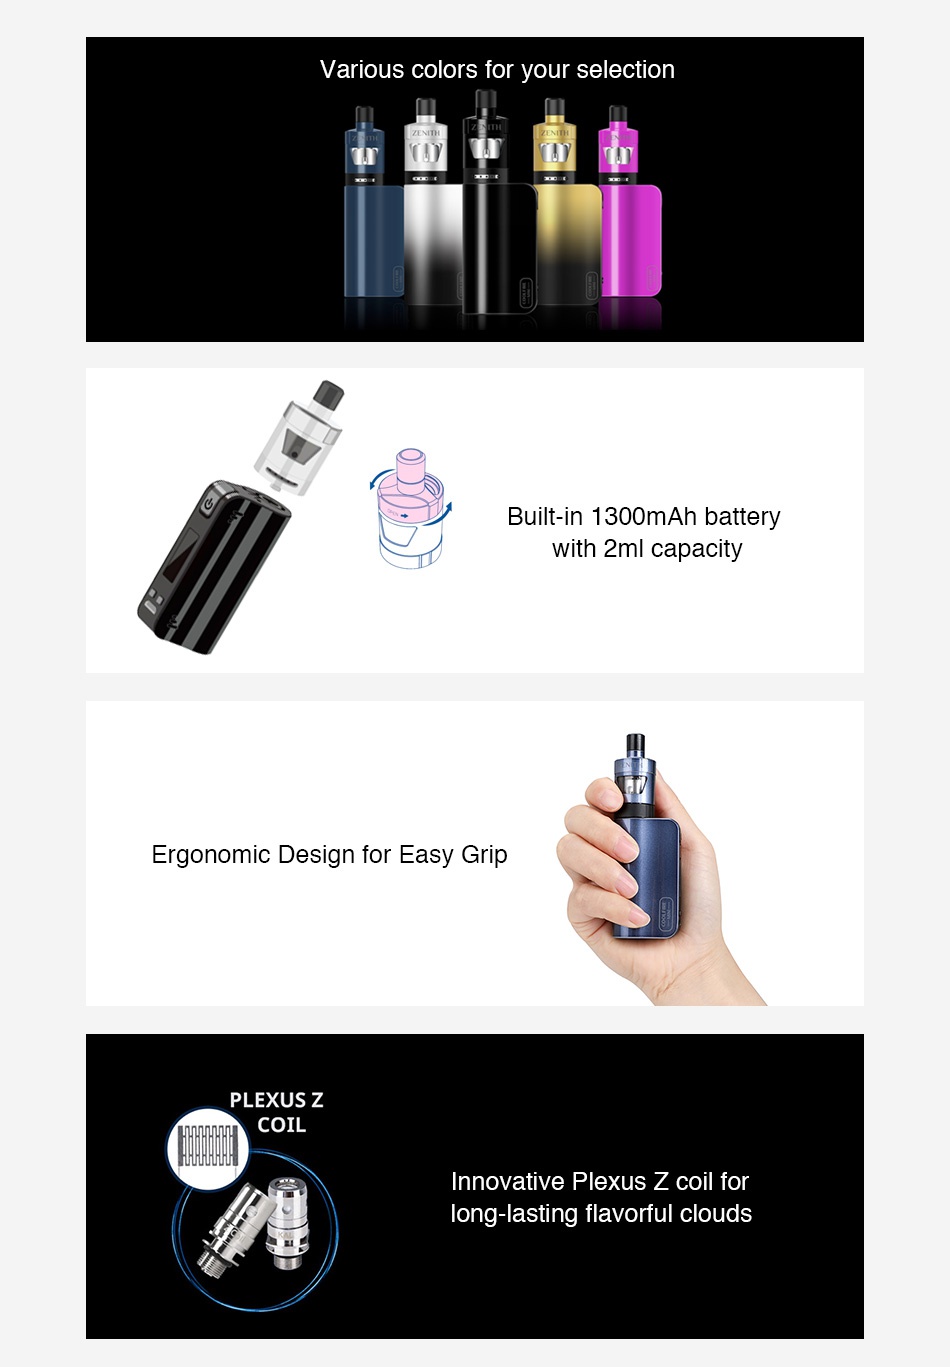 Innokin CoolFire Mini Zenith D22 Kit 1300mAh Various colors for your selection Built in 1300mAh battery with 2ml capacity Ergonomic Design for Easy Grip PLEXUS Z COIL Innovative plexus z coil for long lasting flavorful clouds